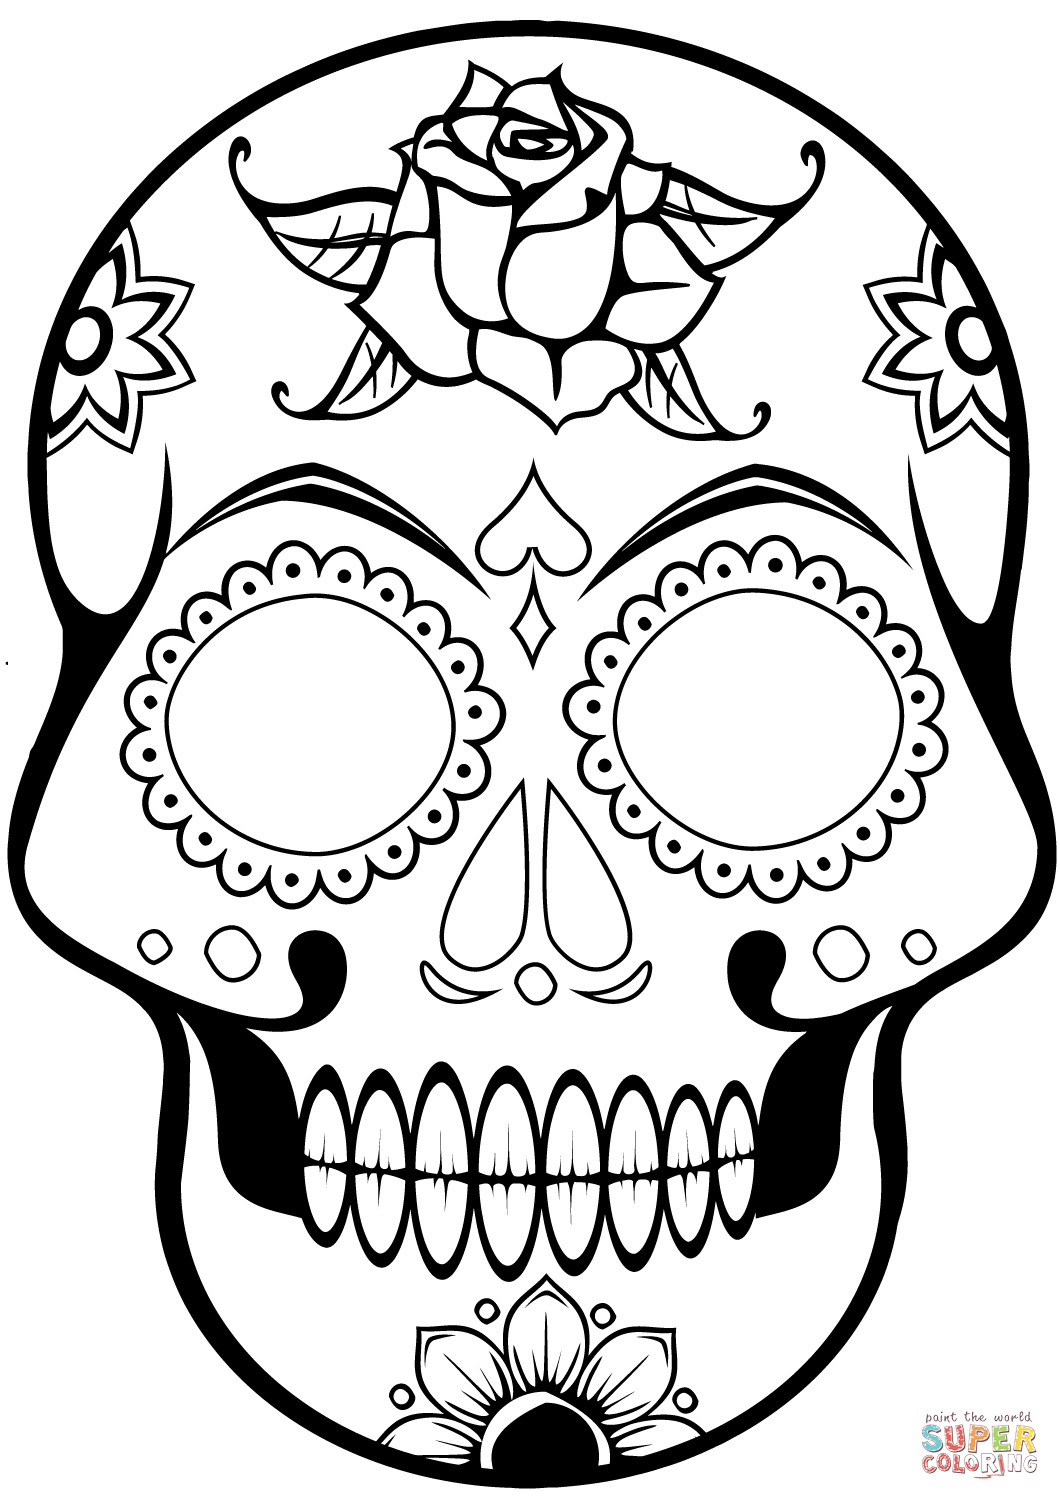 sugar-skull-black-and-white-drawing-free-download-on-clipartmag